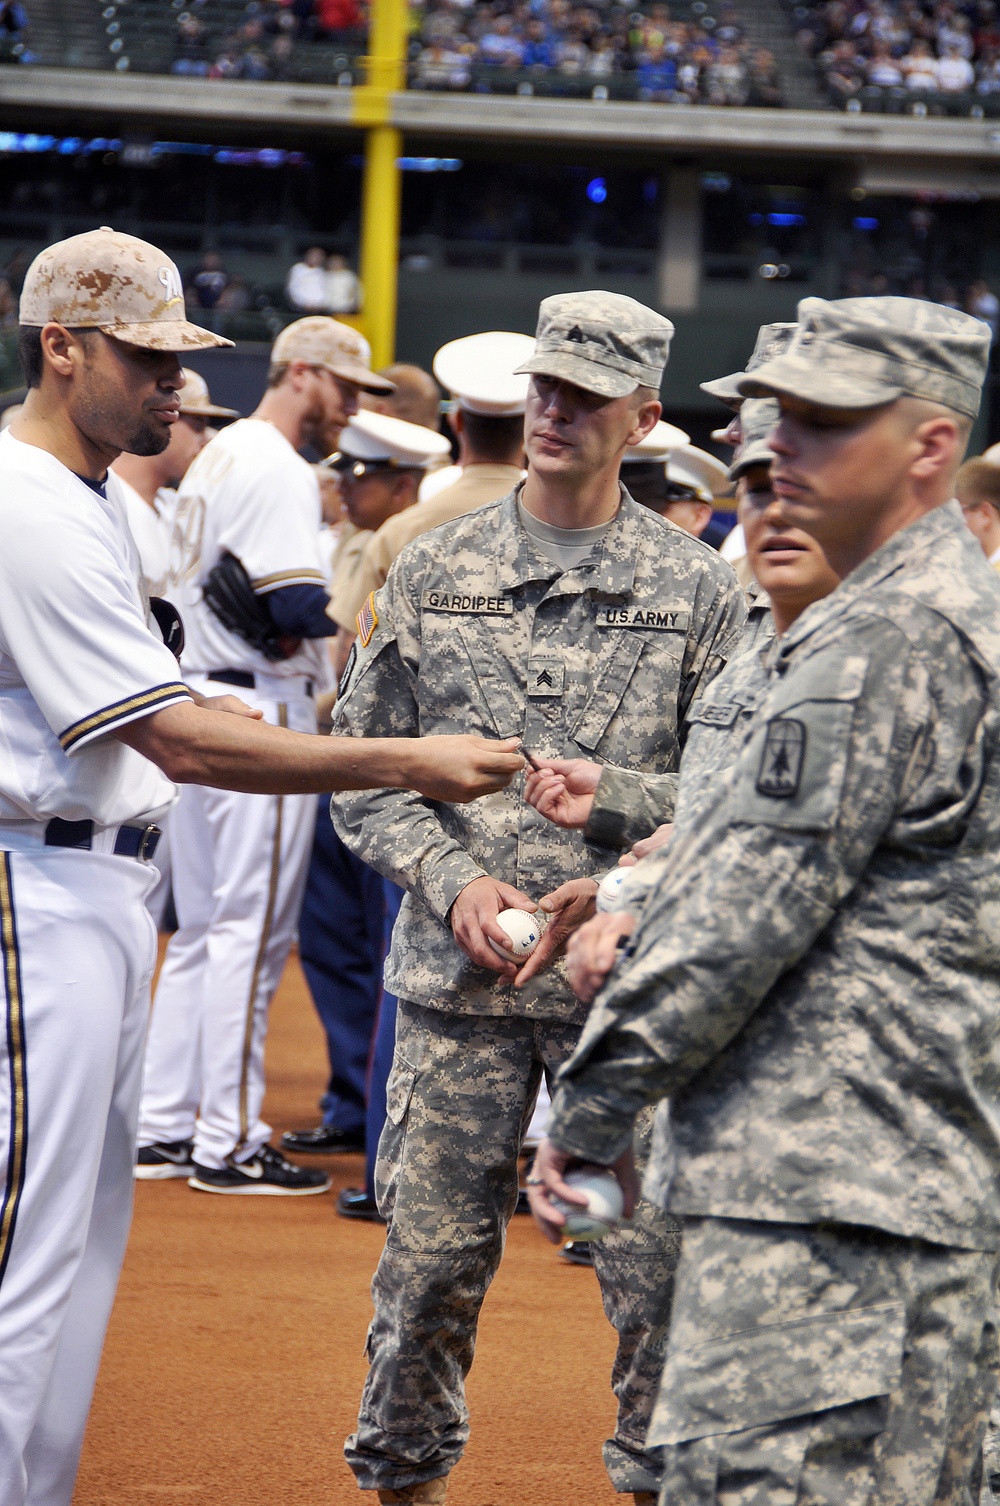 Milwaukee Brewers salute the military on Memorial Day